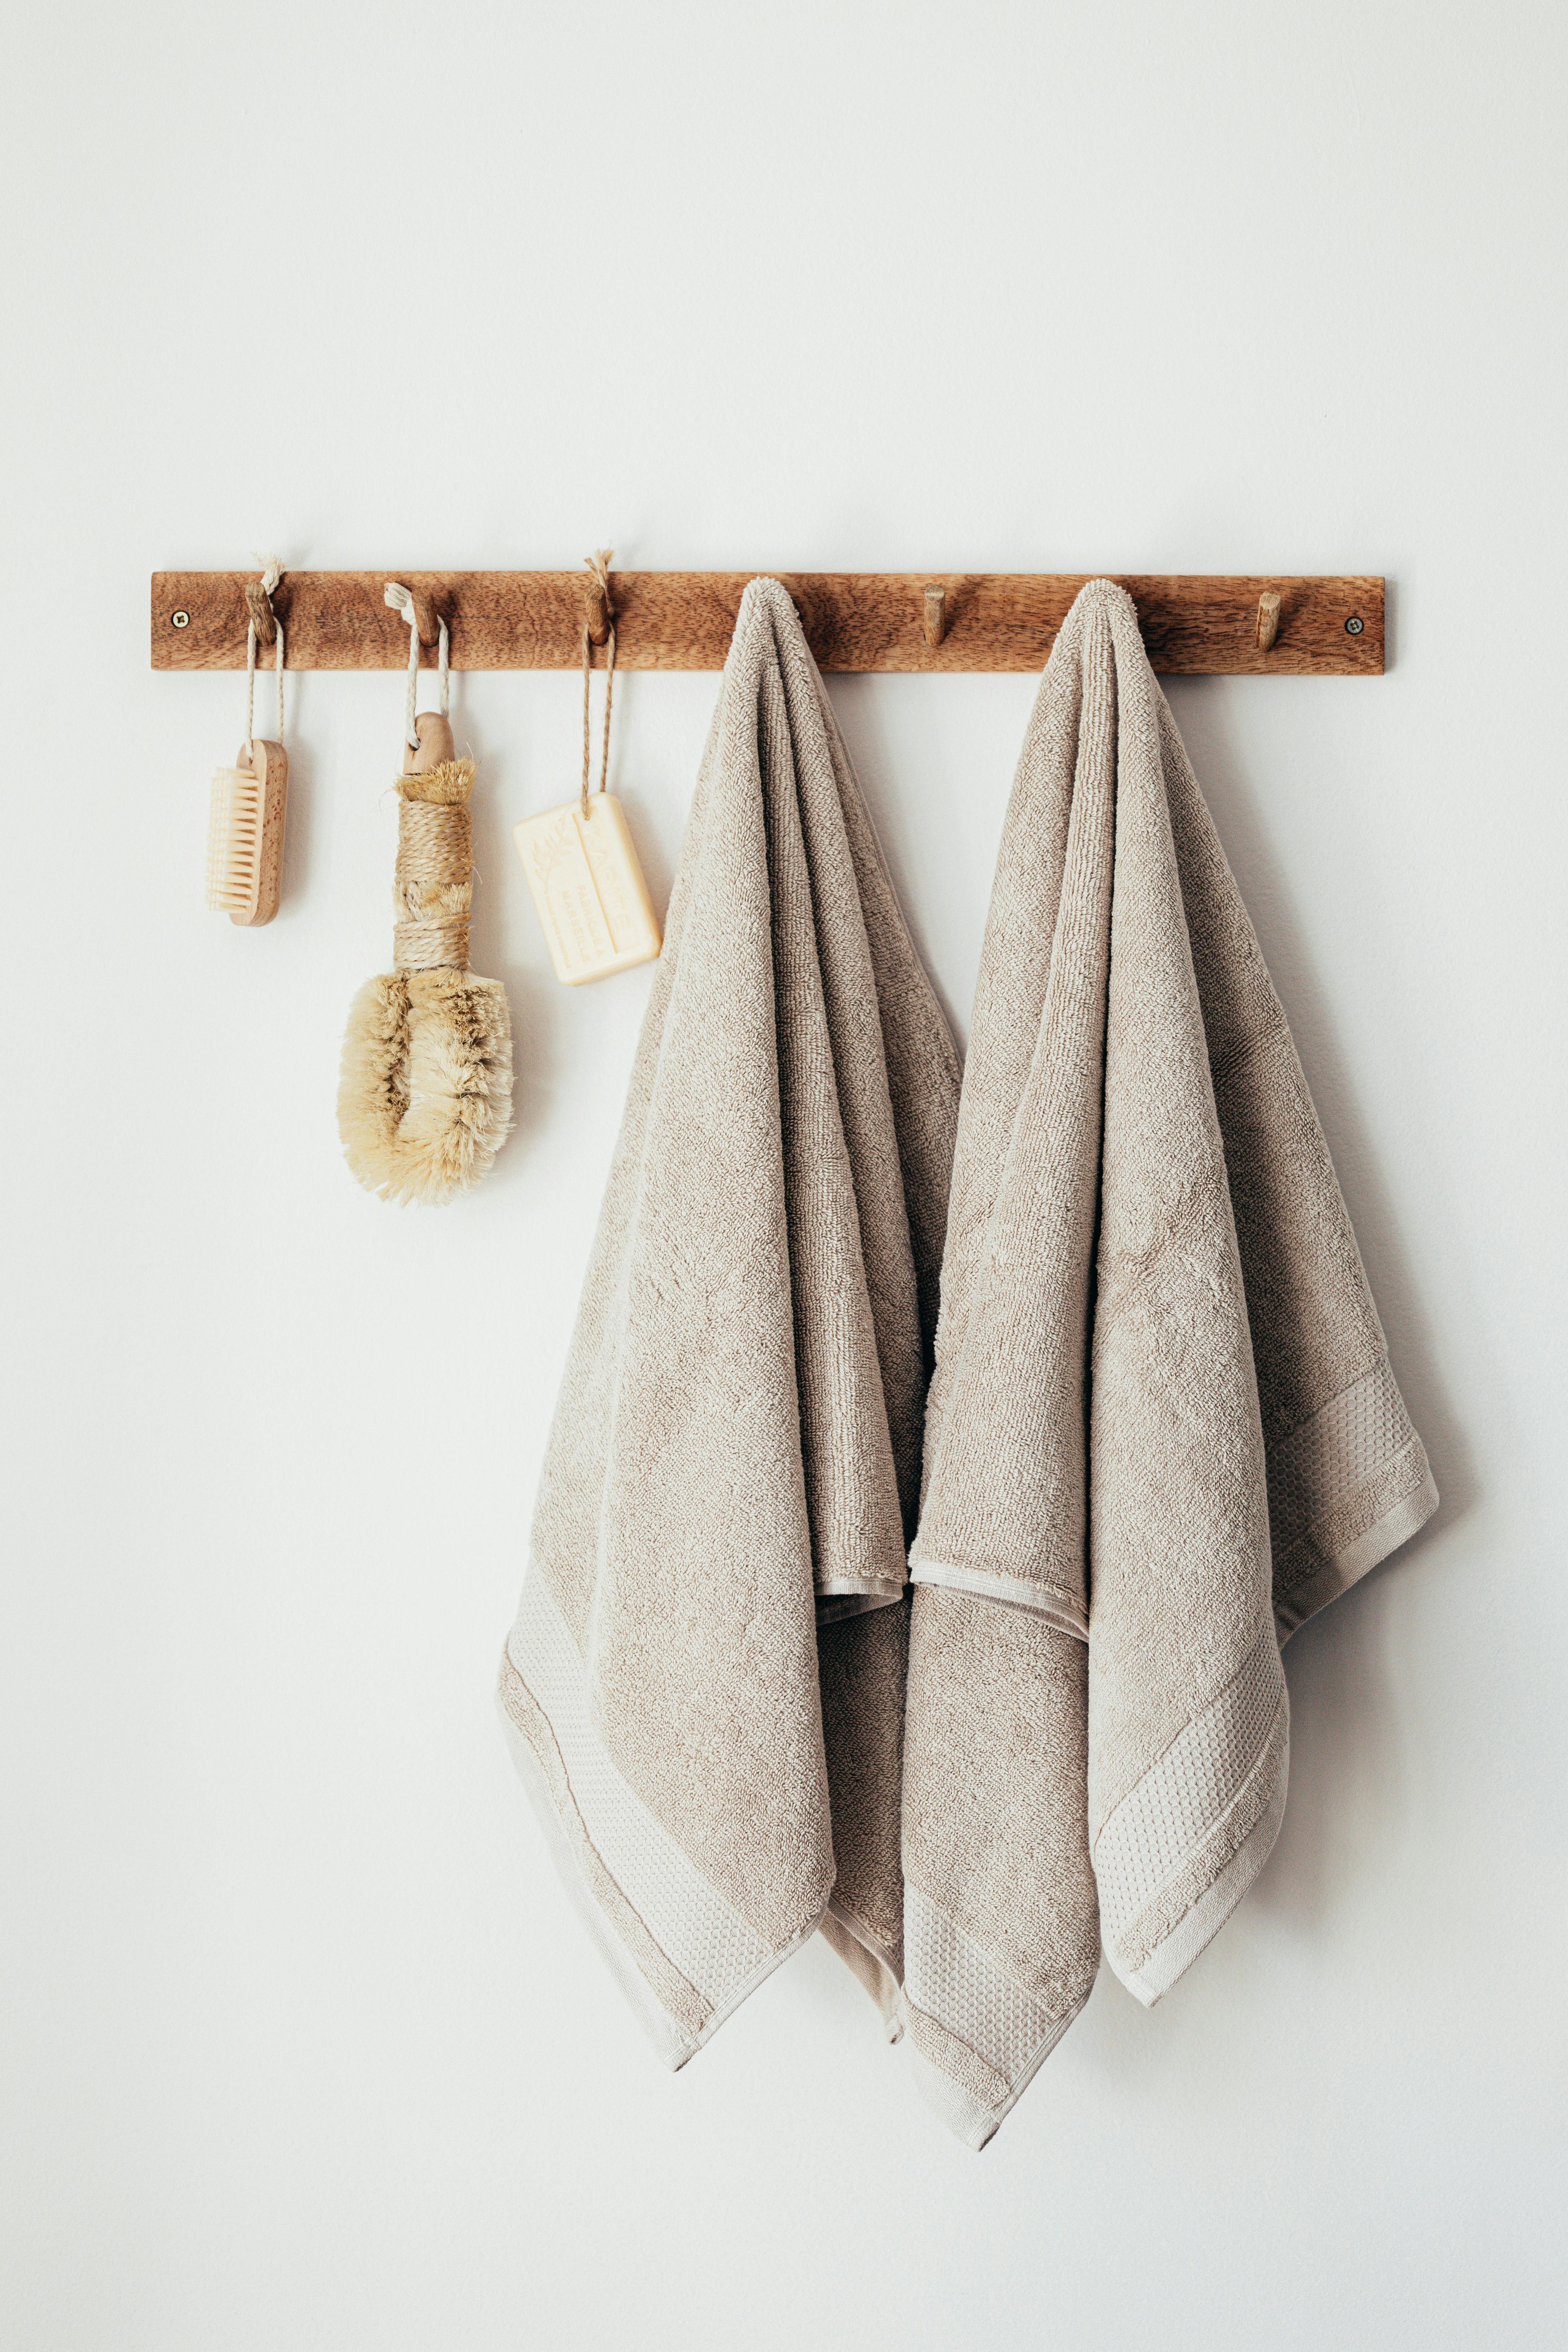 Collection of Natural Muslin Kitchen Towels are Hung in a Row on an Unusual  Wooden Hanger. Natural, Soft, Airy and Stock Image - Image of material,  fiber: 215370293